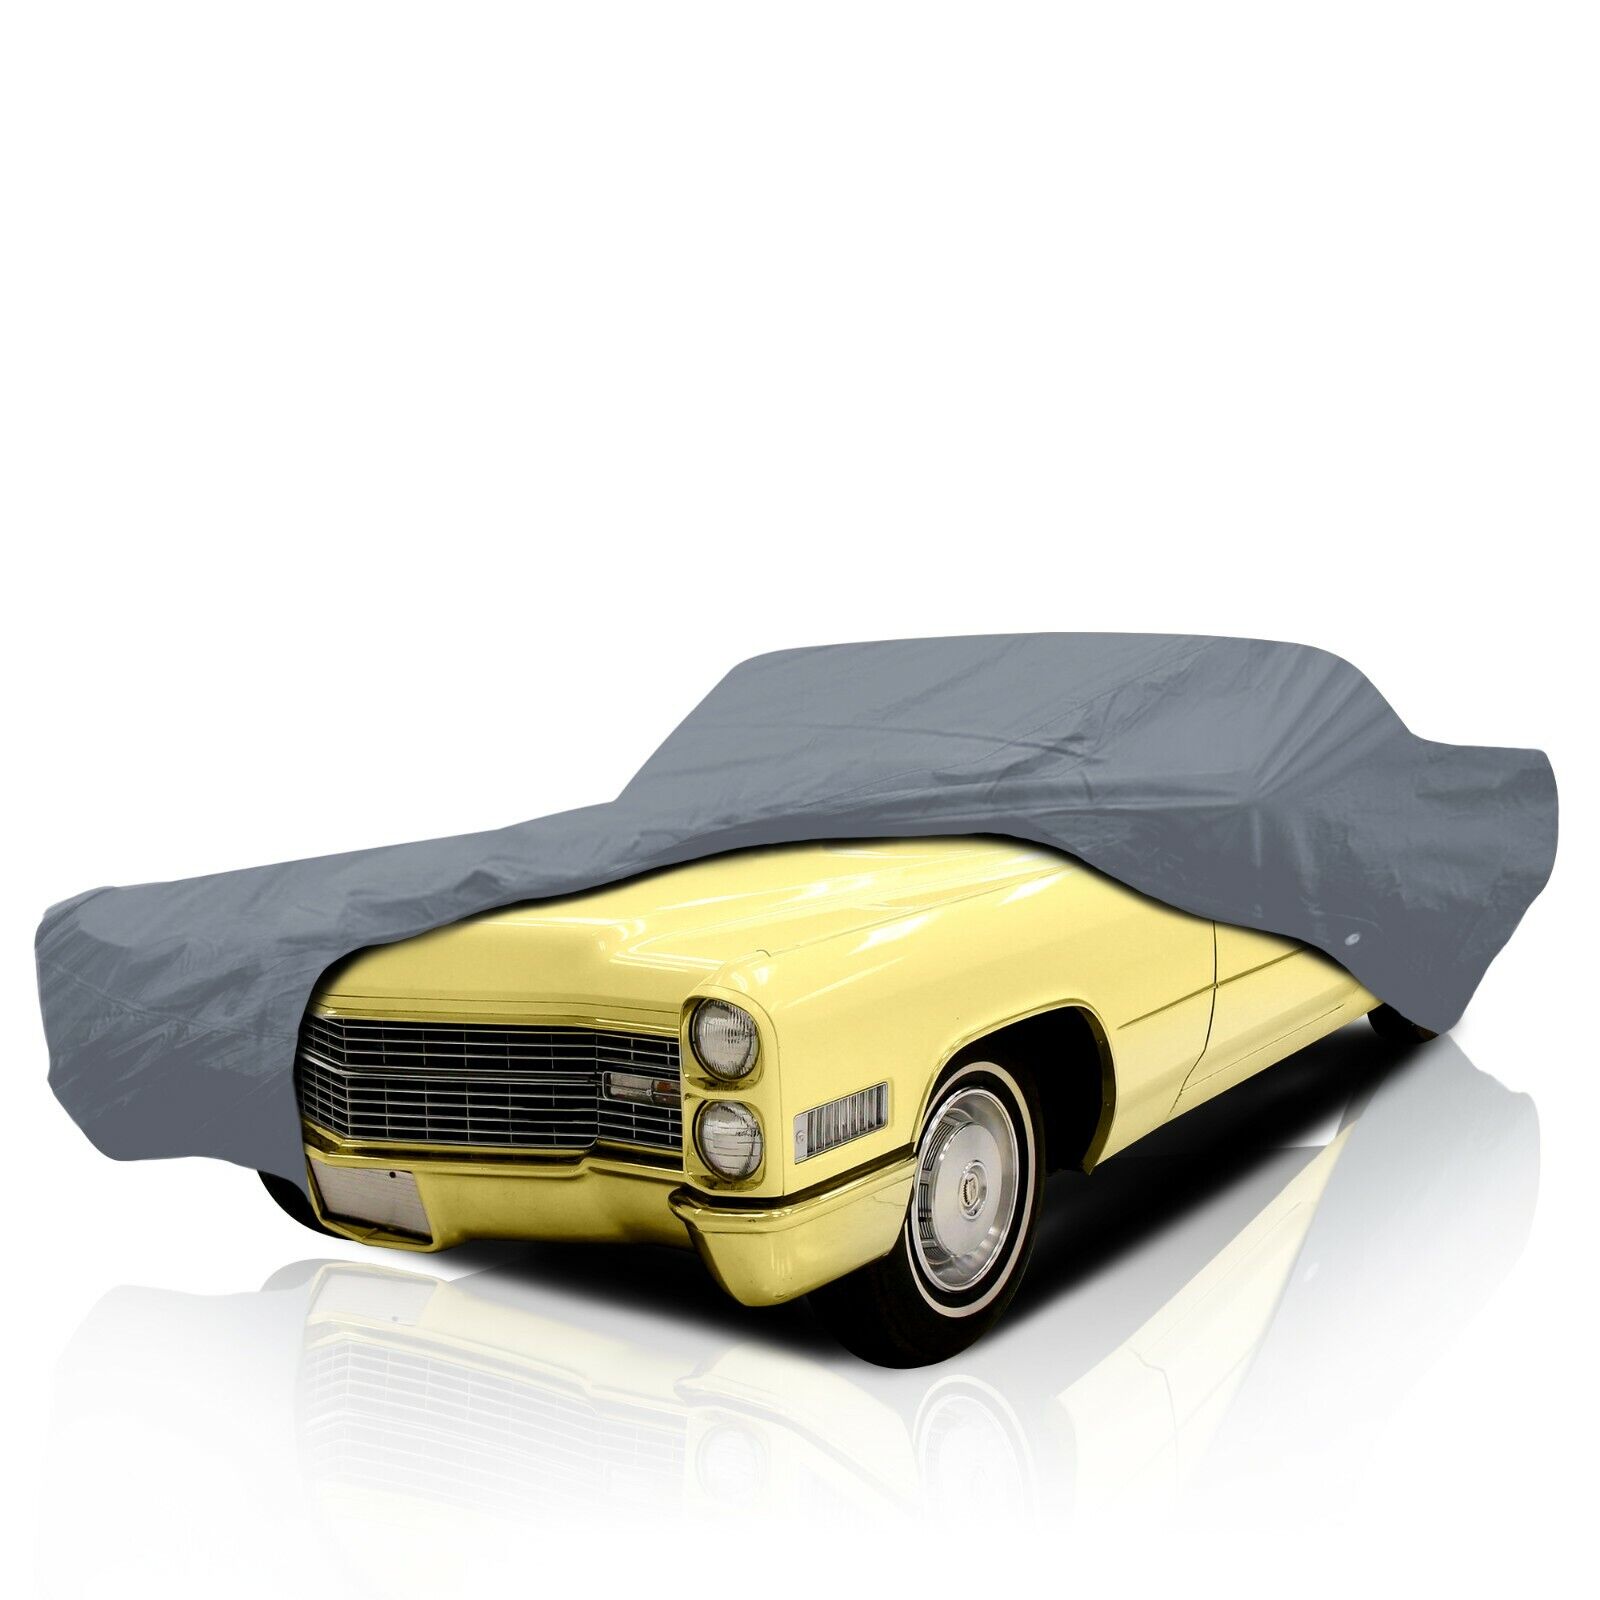 [CCT] 5 Layer Weather/Waterproof Full Car Cover For Cadillac DeVille 1965-1970